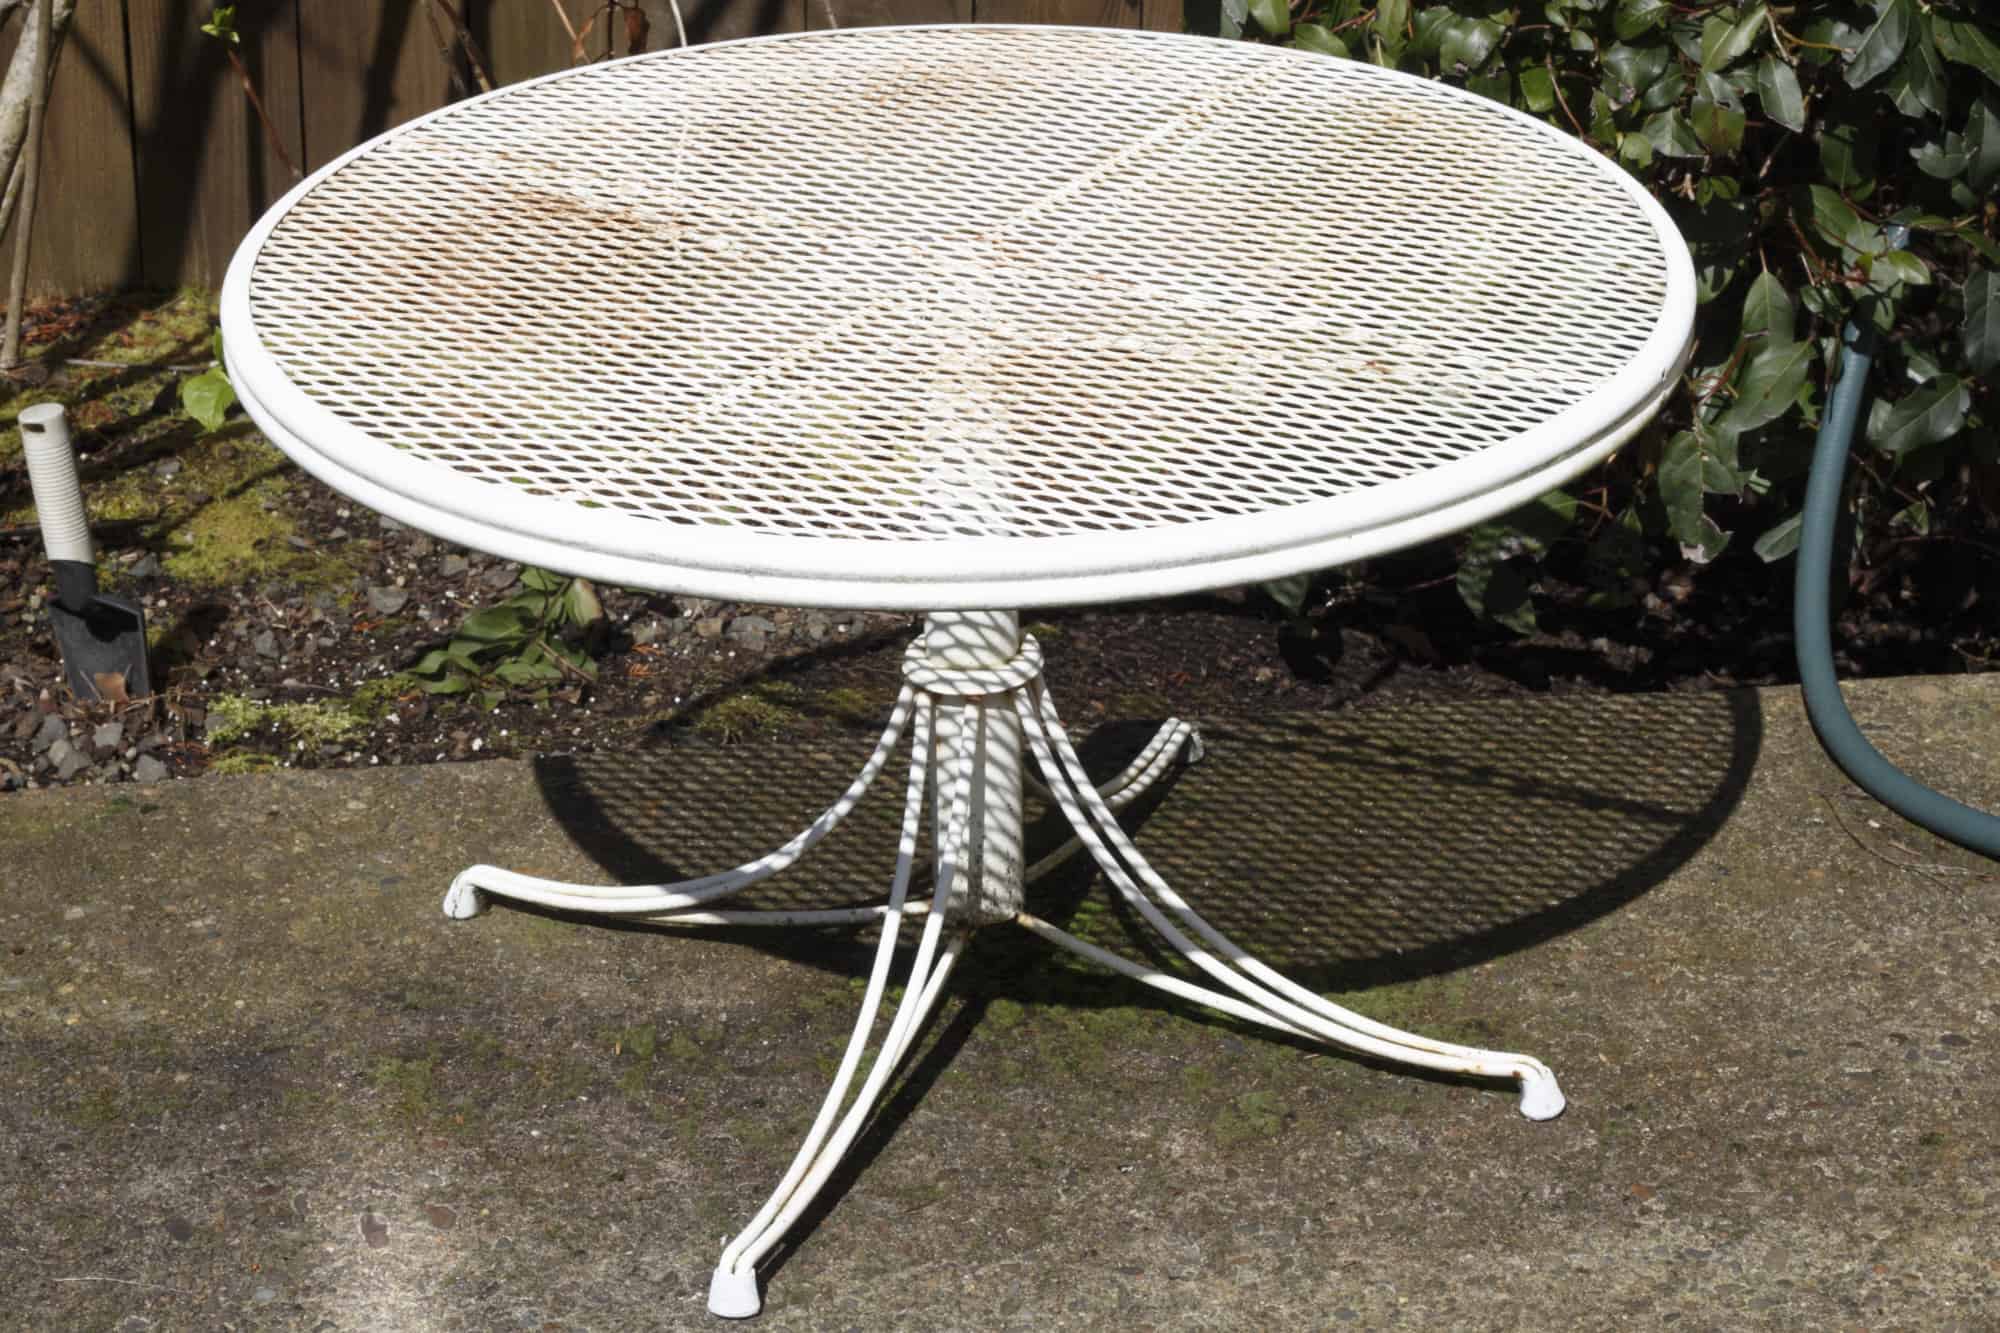 Patio Furniture Leaks Rust, How To Repair Rusted Outdoor Furniture